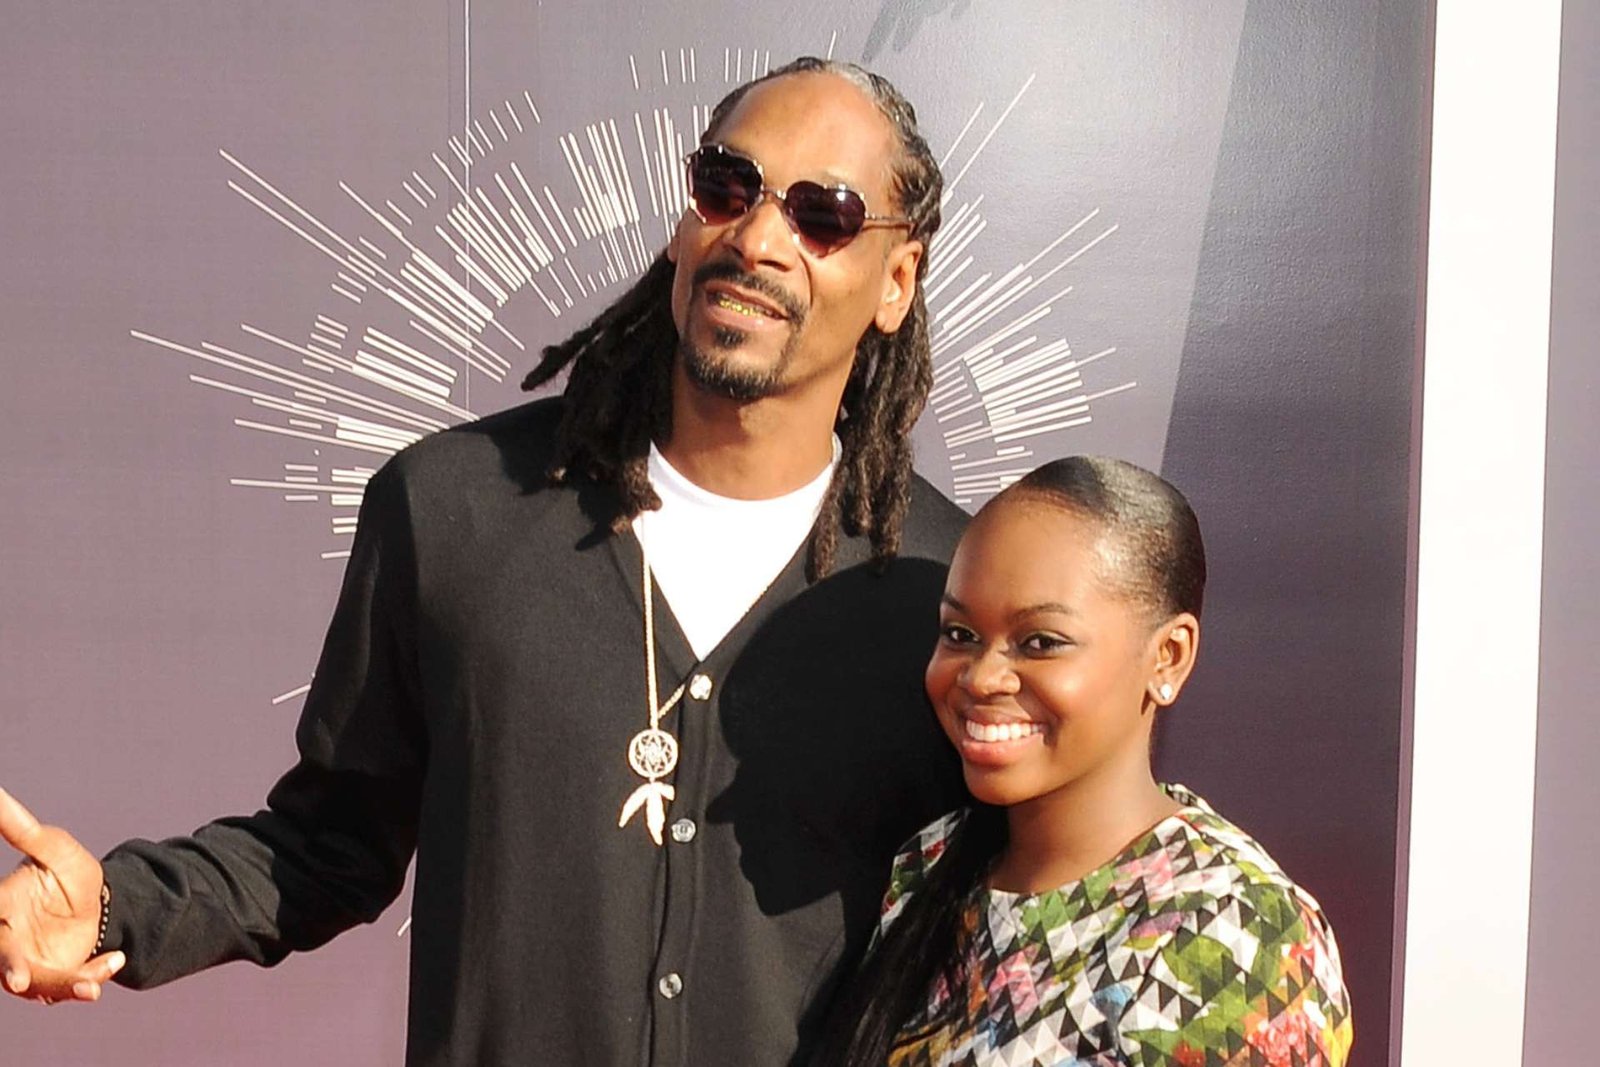 Snoop Dogg Updates Fans on Daughter Cori Broadus’s Health Following Severe Stroke and Lupus Battle